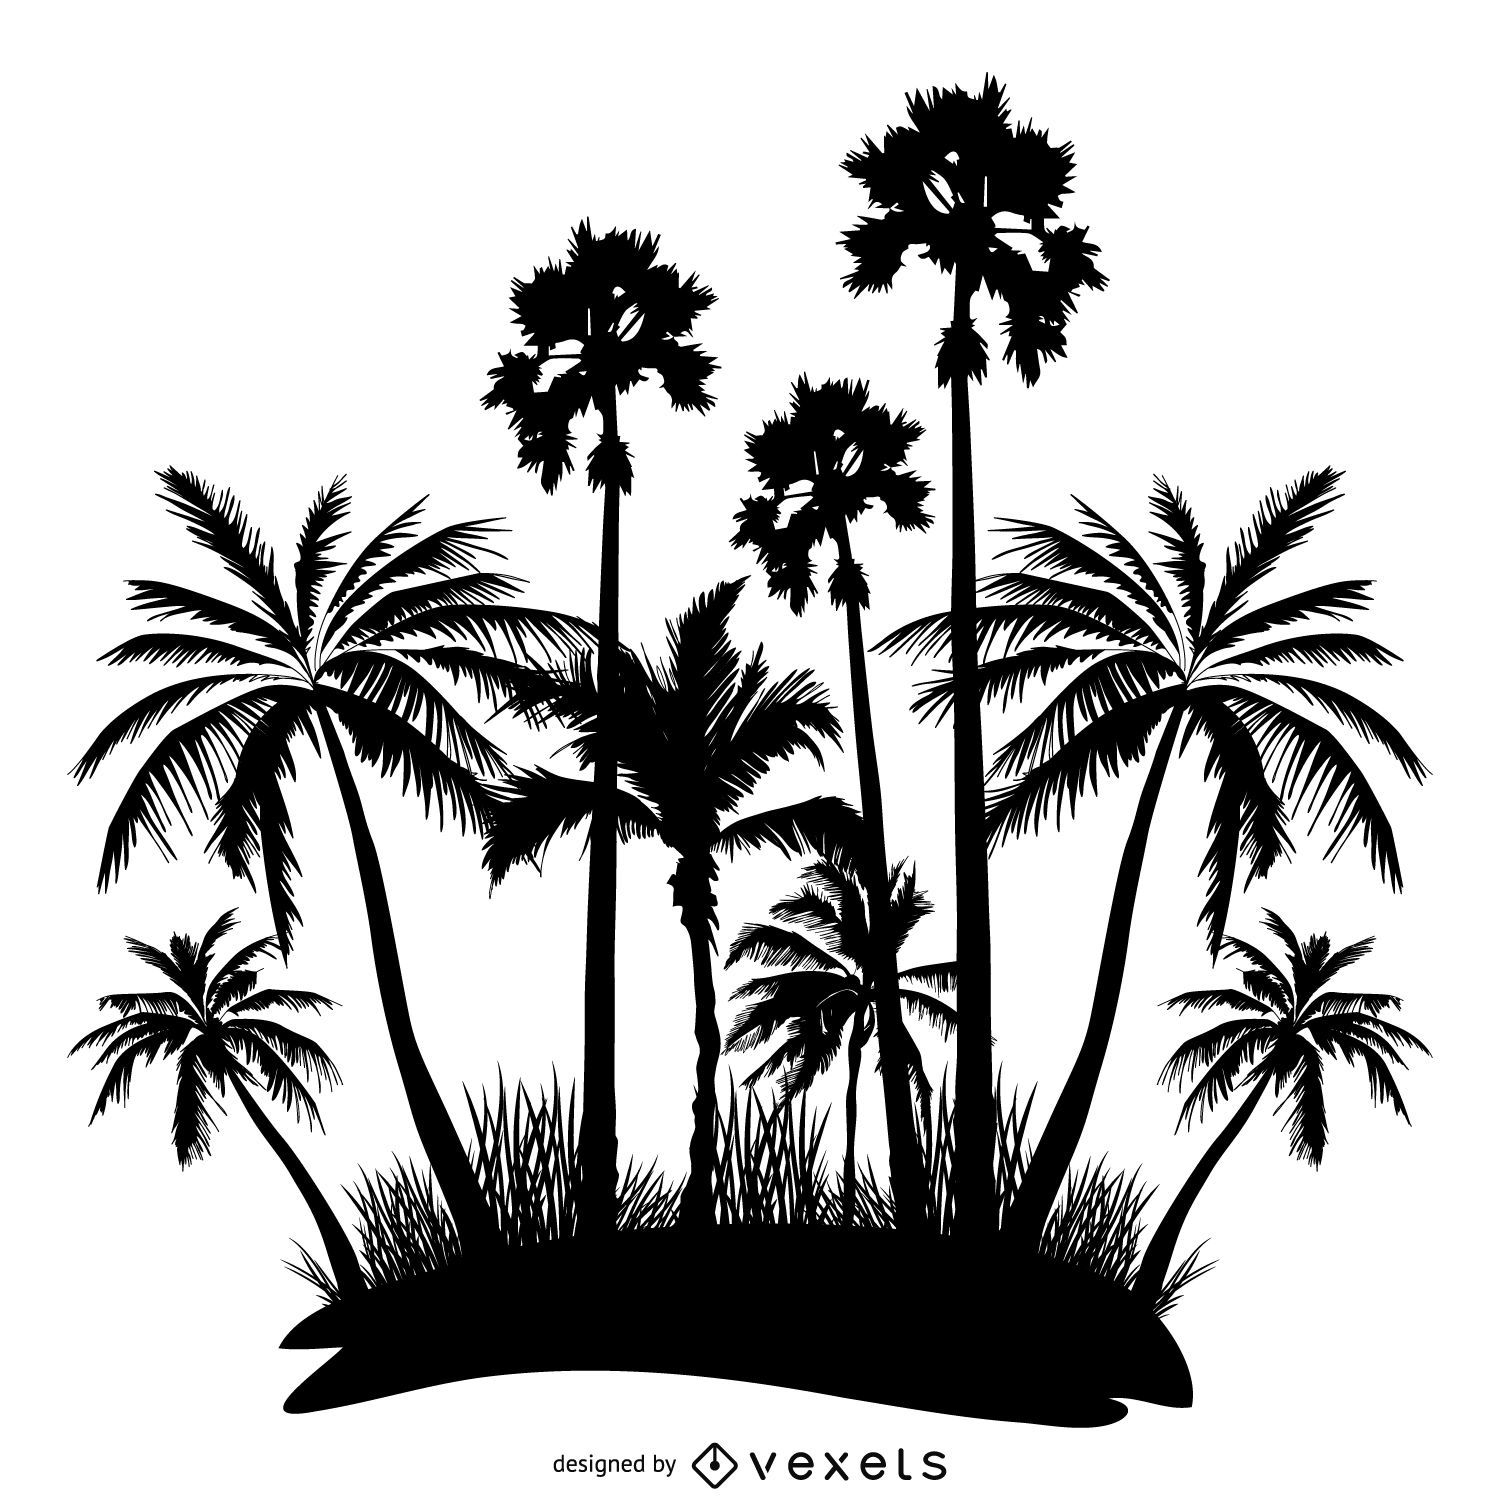 Palm Trees Silhouettes Design